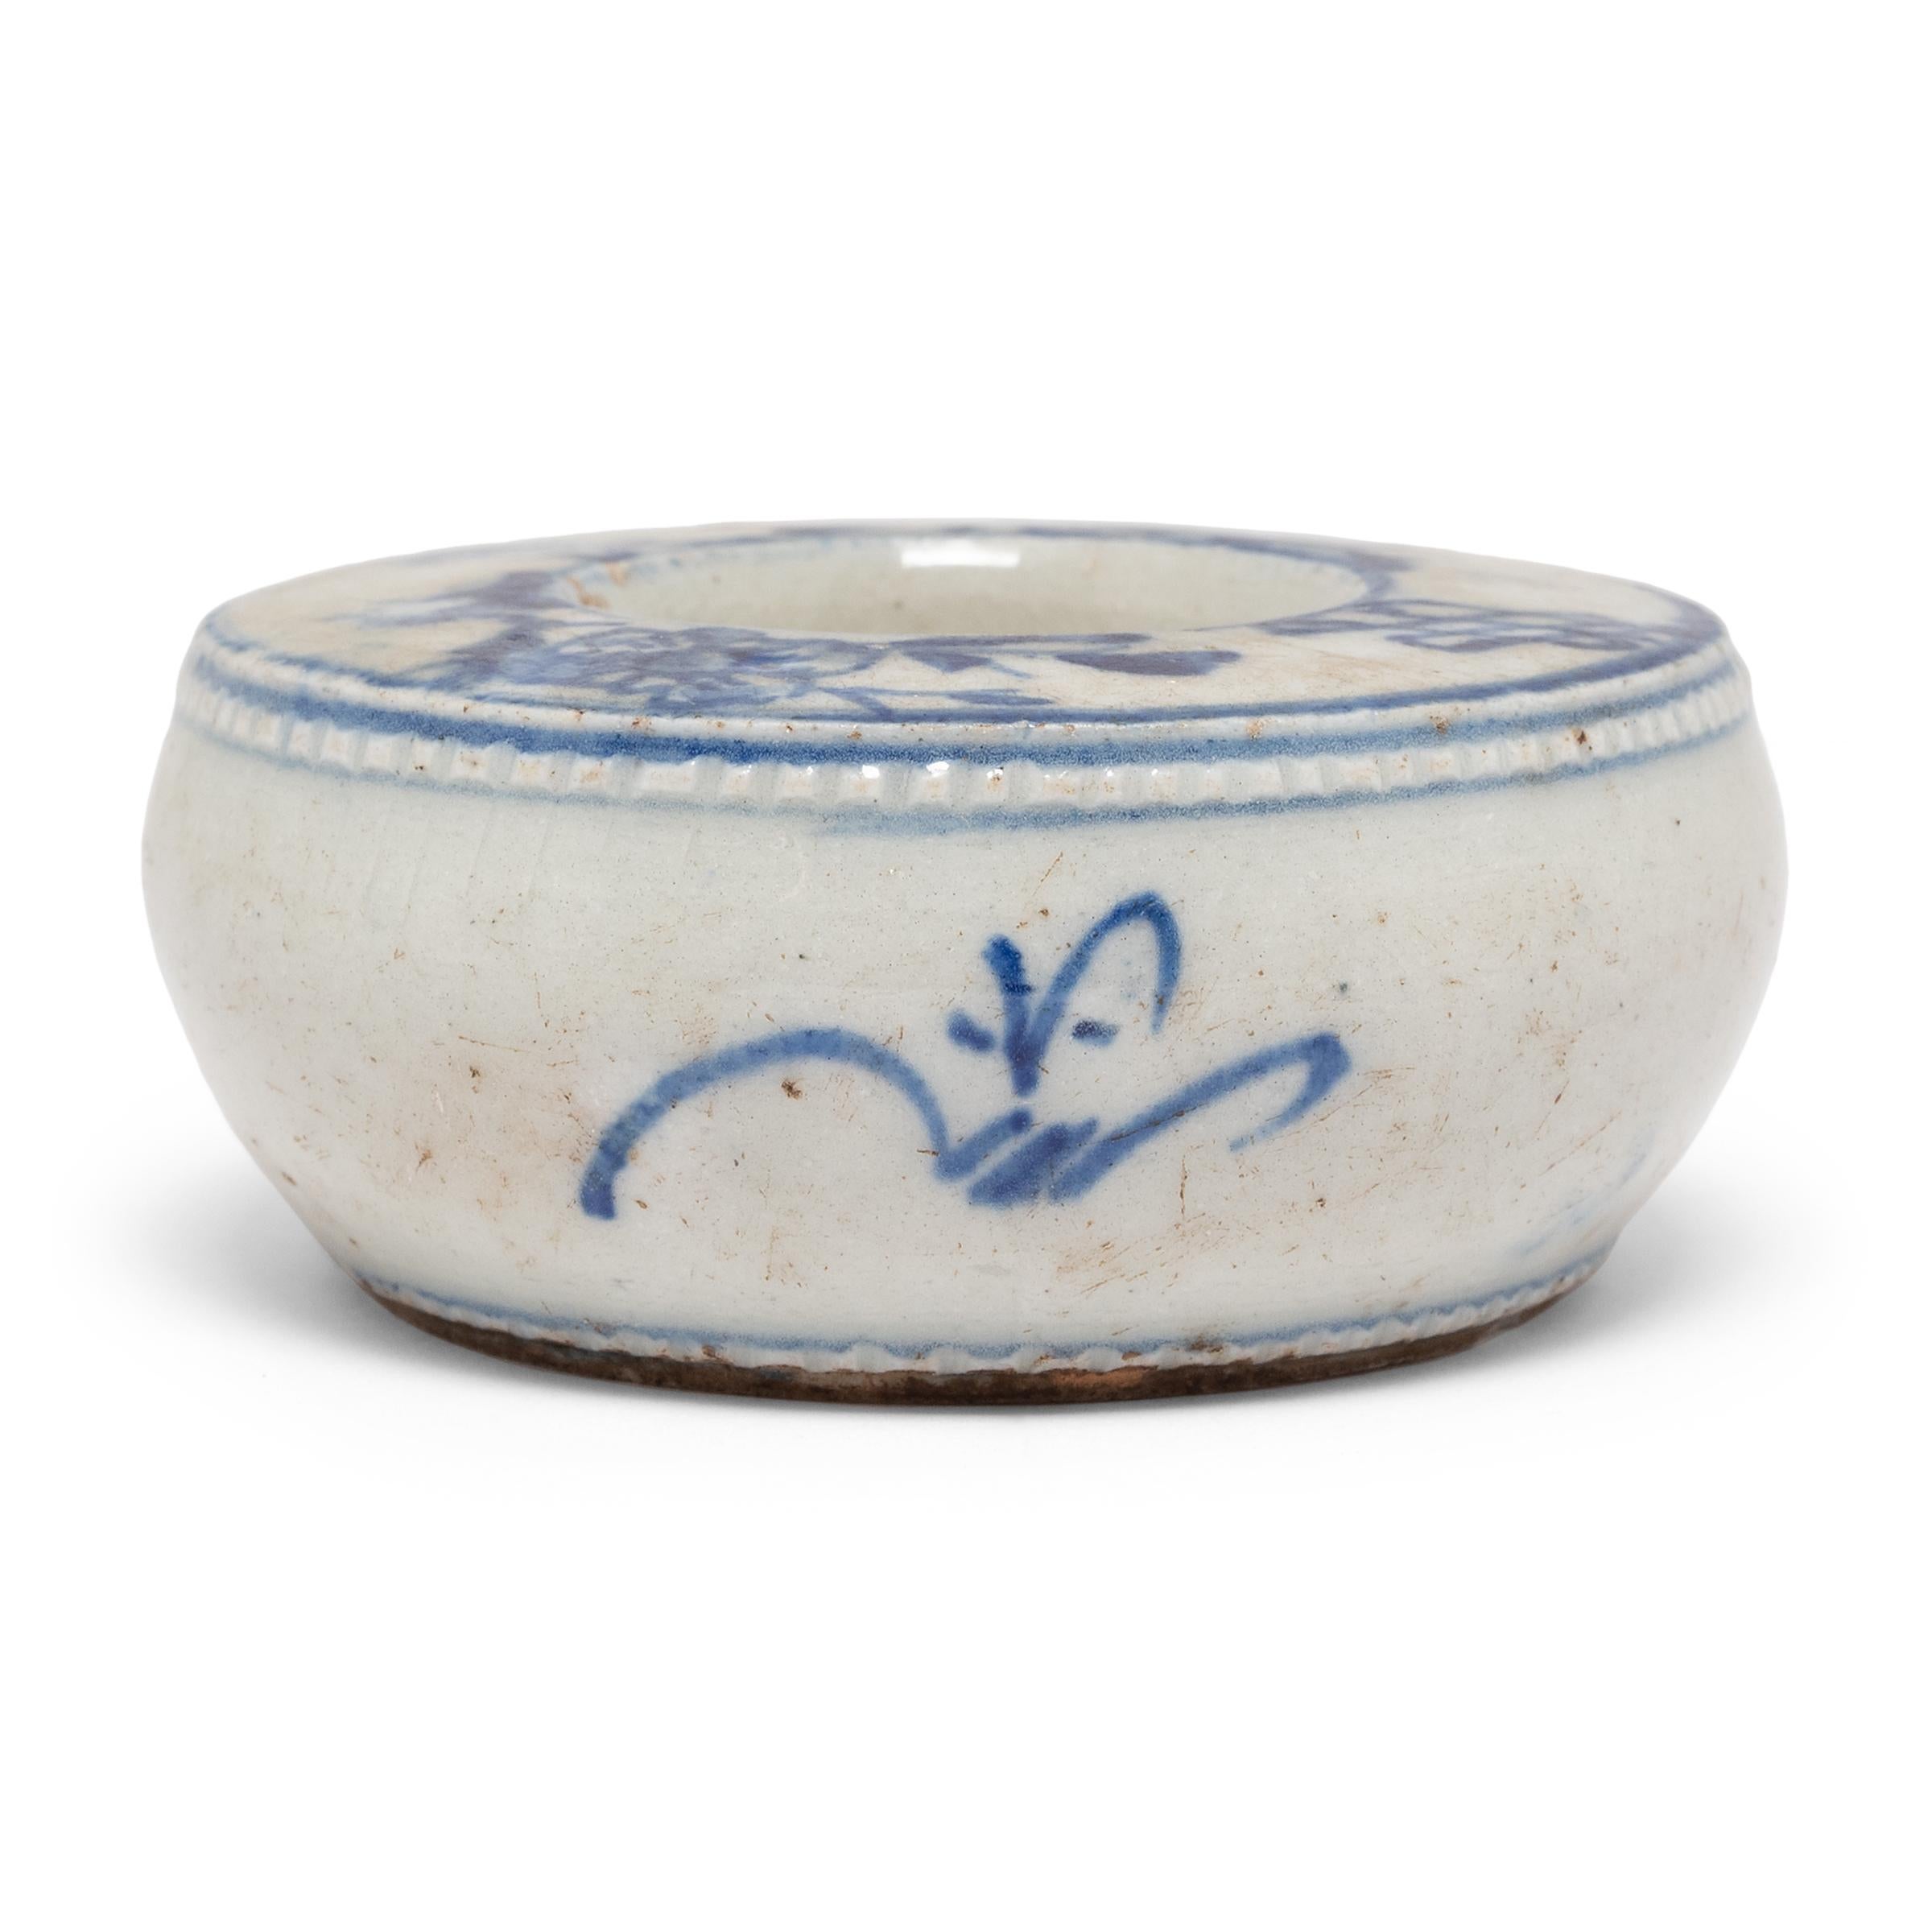 Alongside the Four Treasures of a Chinese scholar - paper, brush, ink, and inkstone - this delicate porcelain water coupe likely once resided on the desk of a great calligrapher. Created in the mid-19th century, this petite coupe would have sat